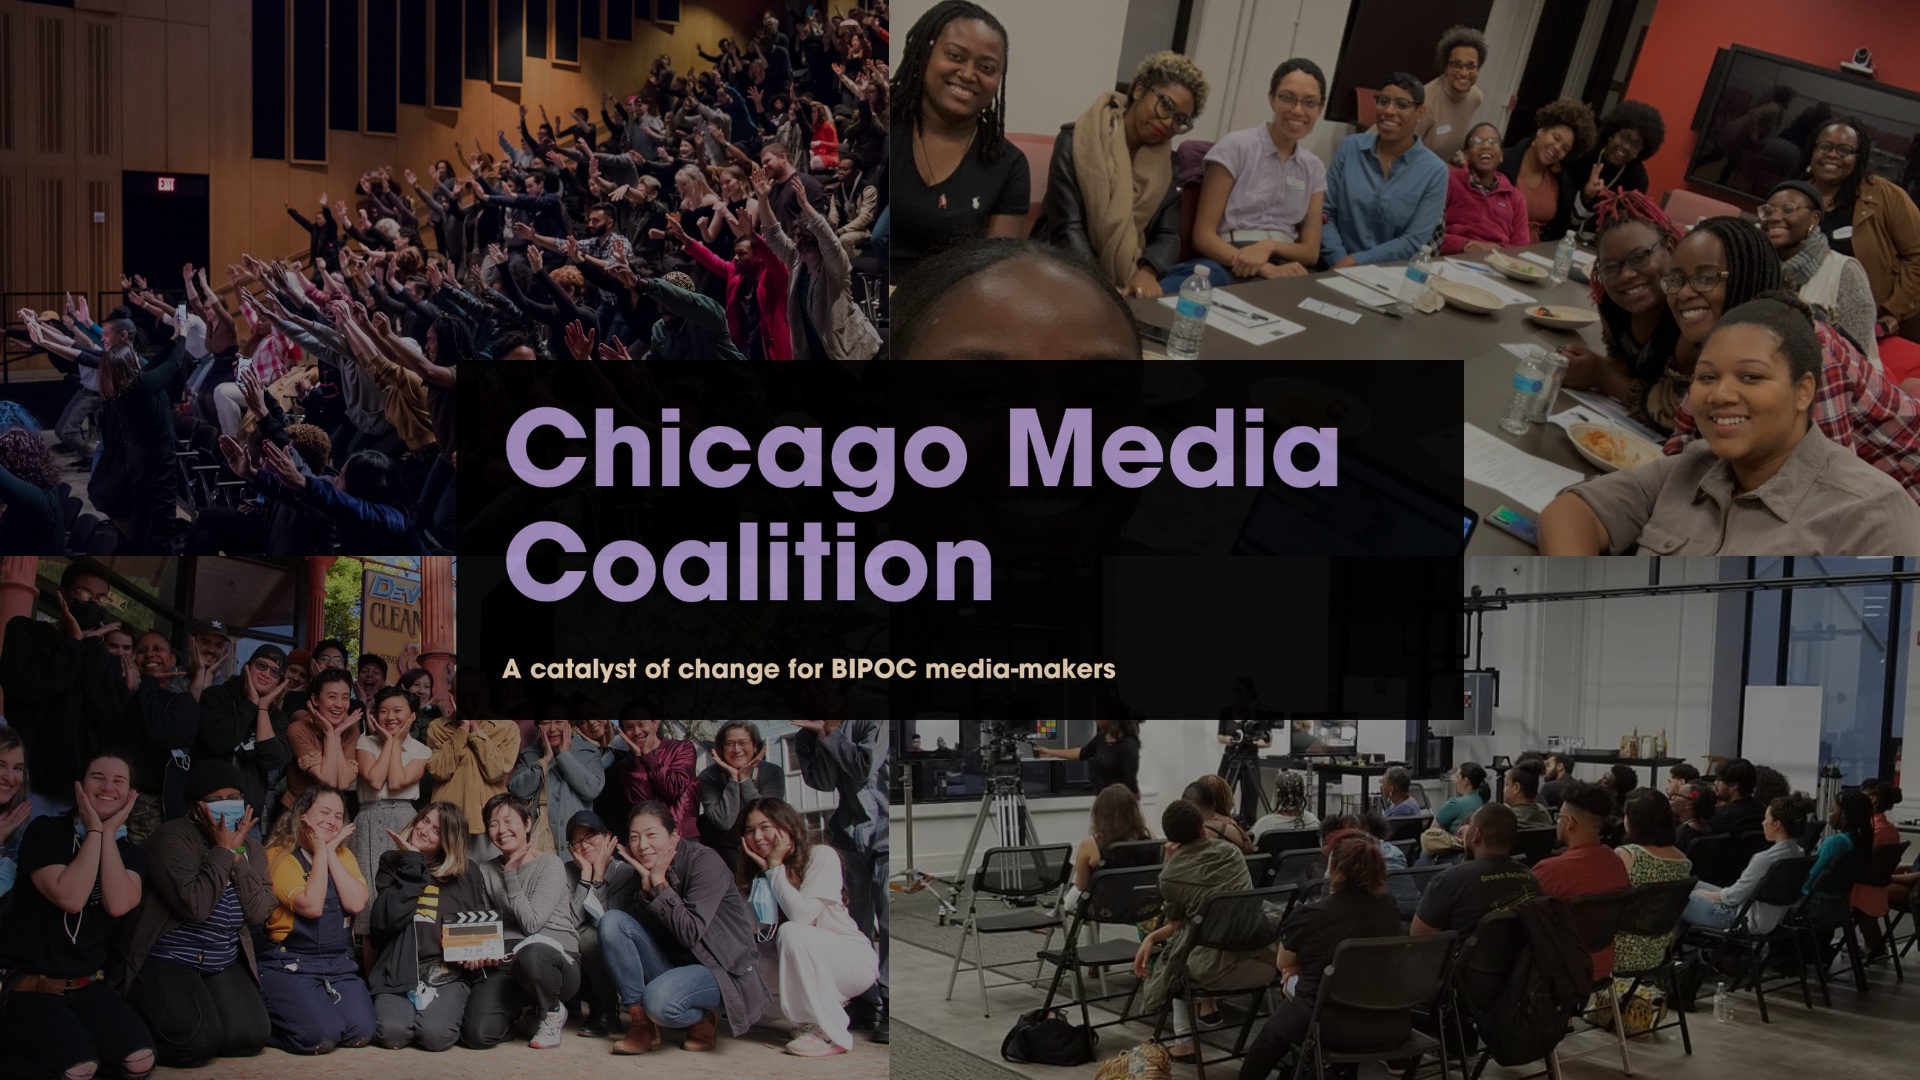 four photos of groups of people attending programming. text over the image says chicago media coalition. a catalyst of change for BIPOC media-makers